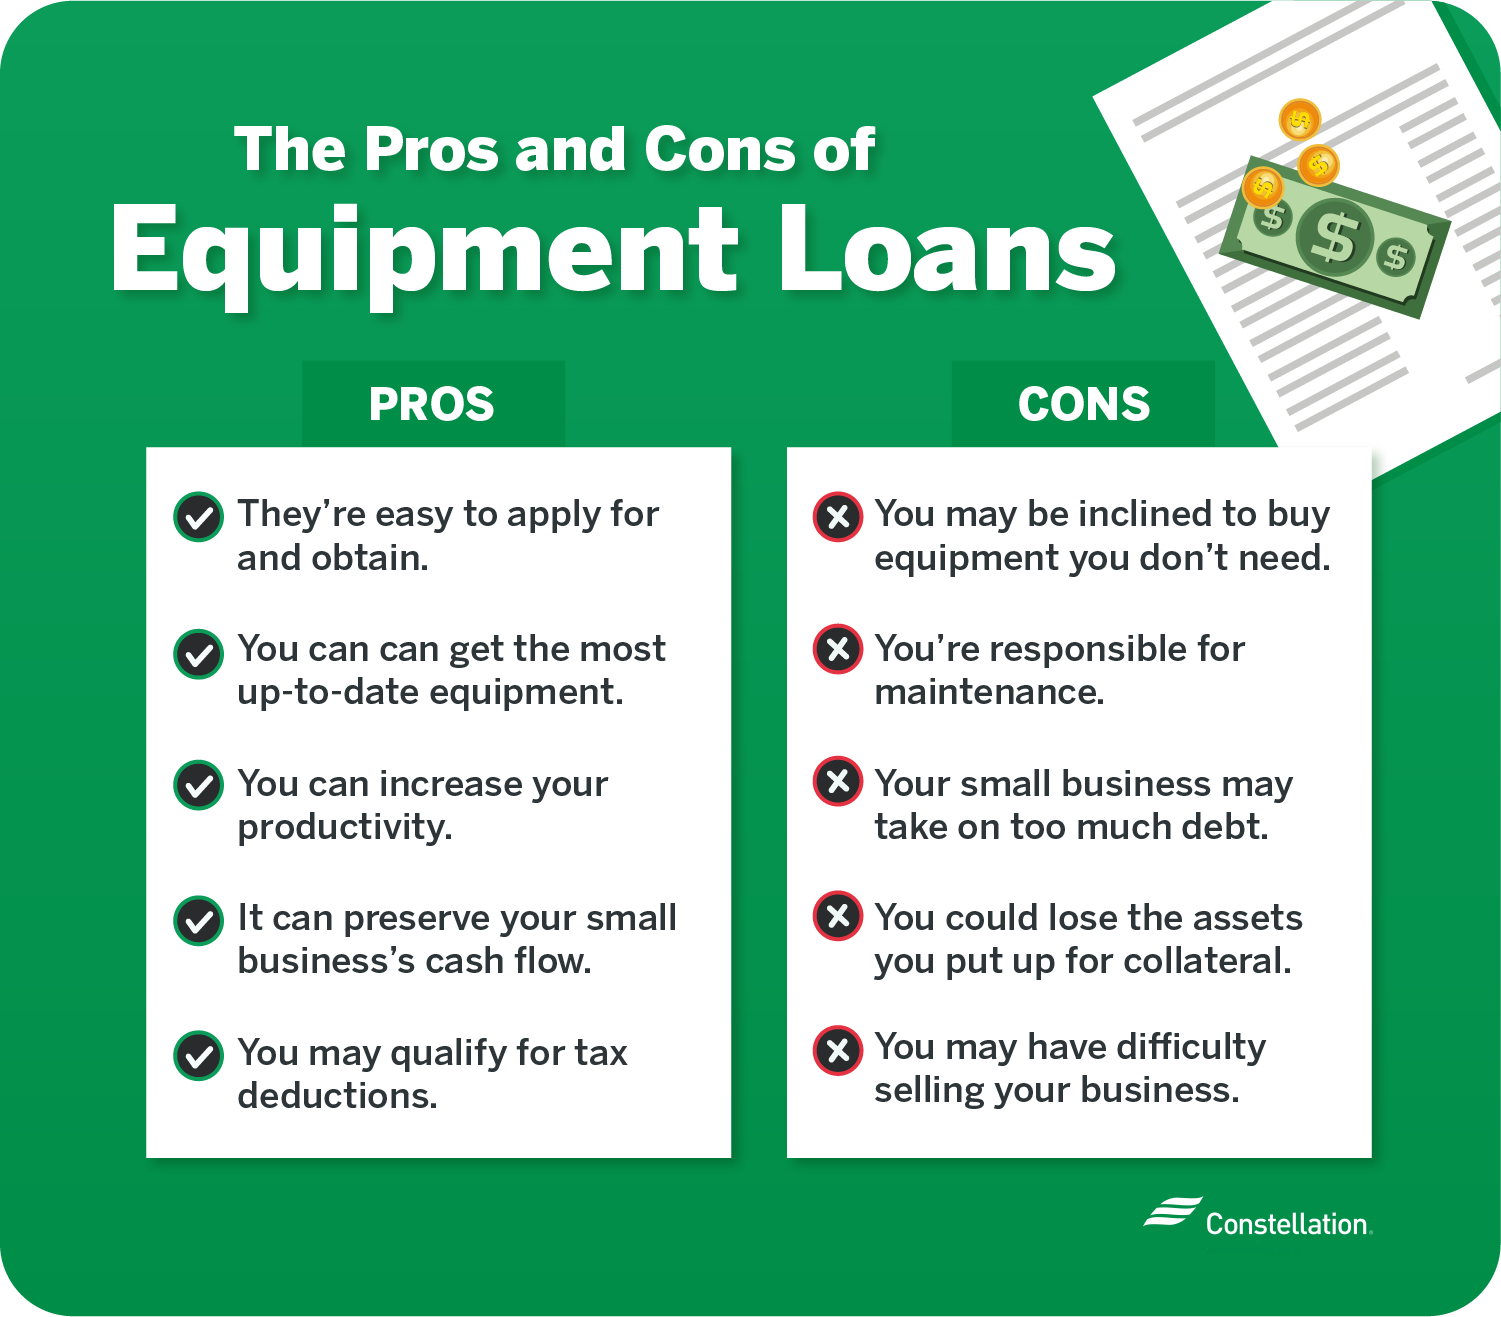 Pros and cons of financing your business's equipment